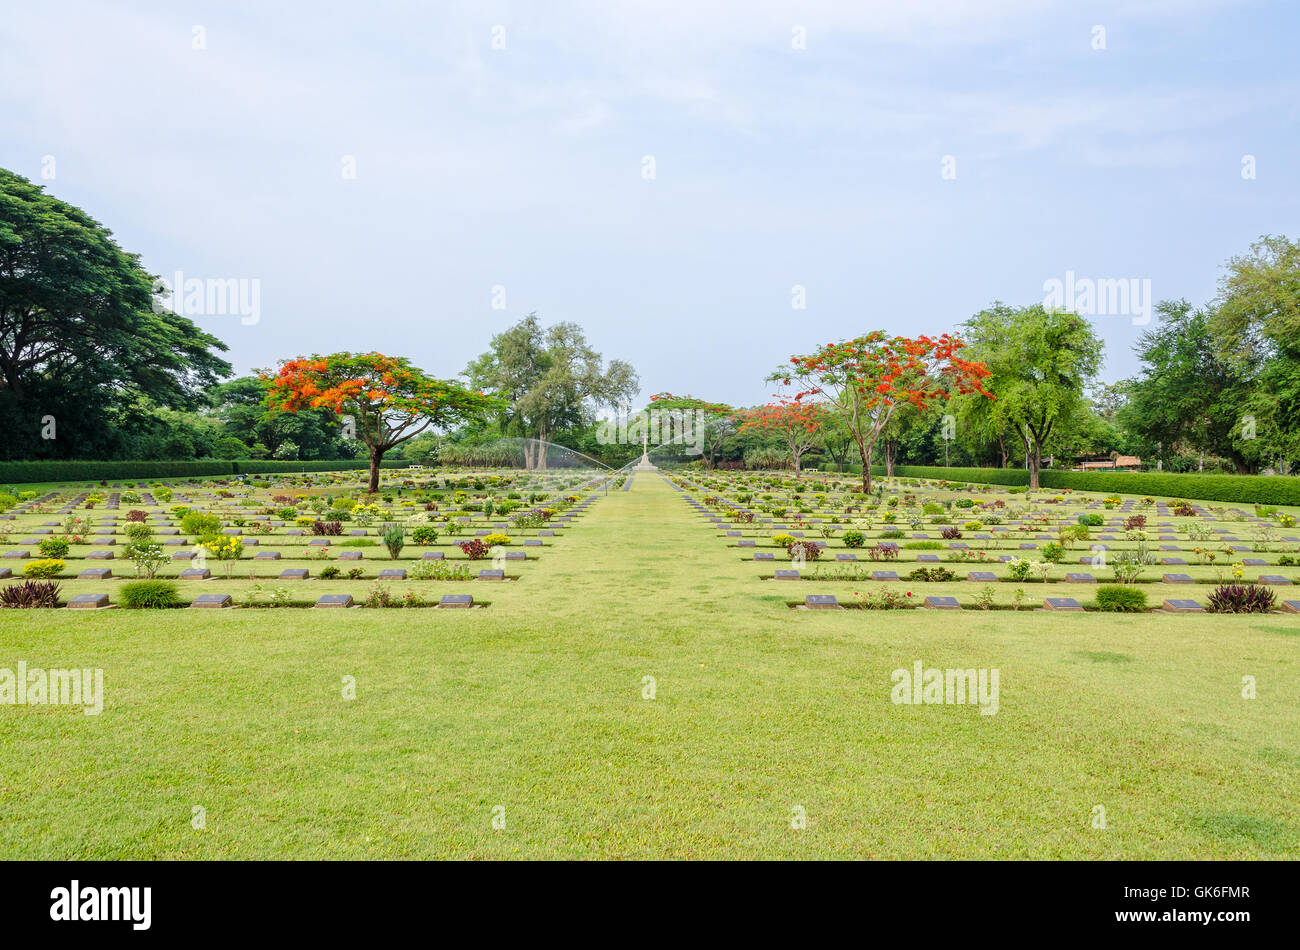 Chungkai War Cemetery this is historical monuments where to respect prisoners of the World War 2 who rest in peace here Stock Photo